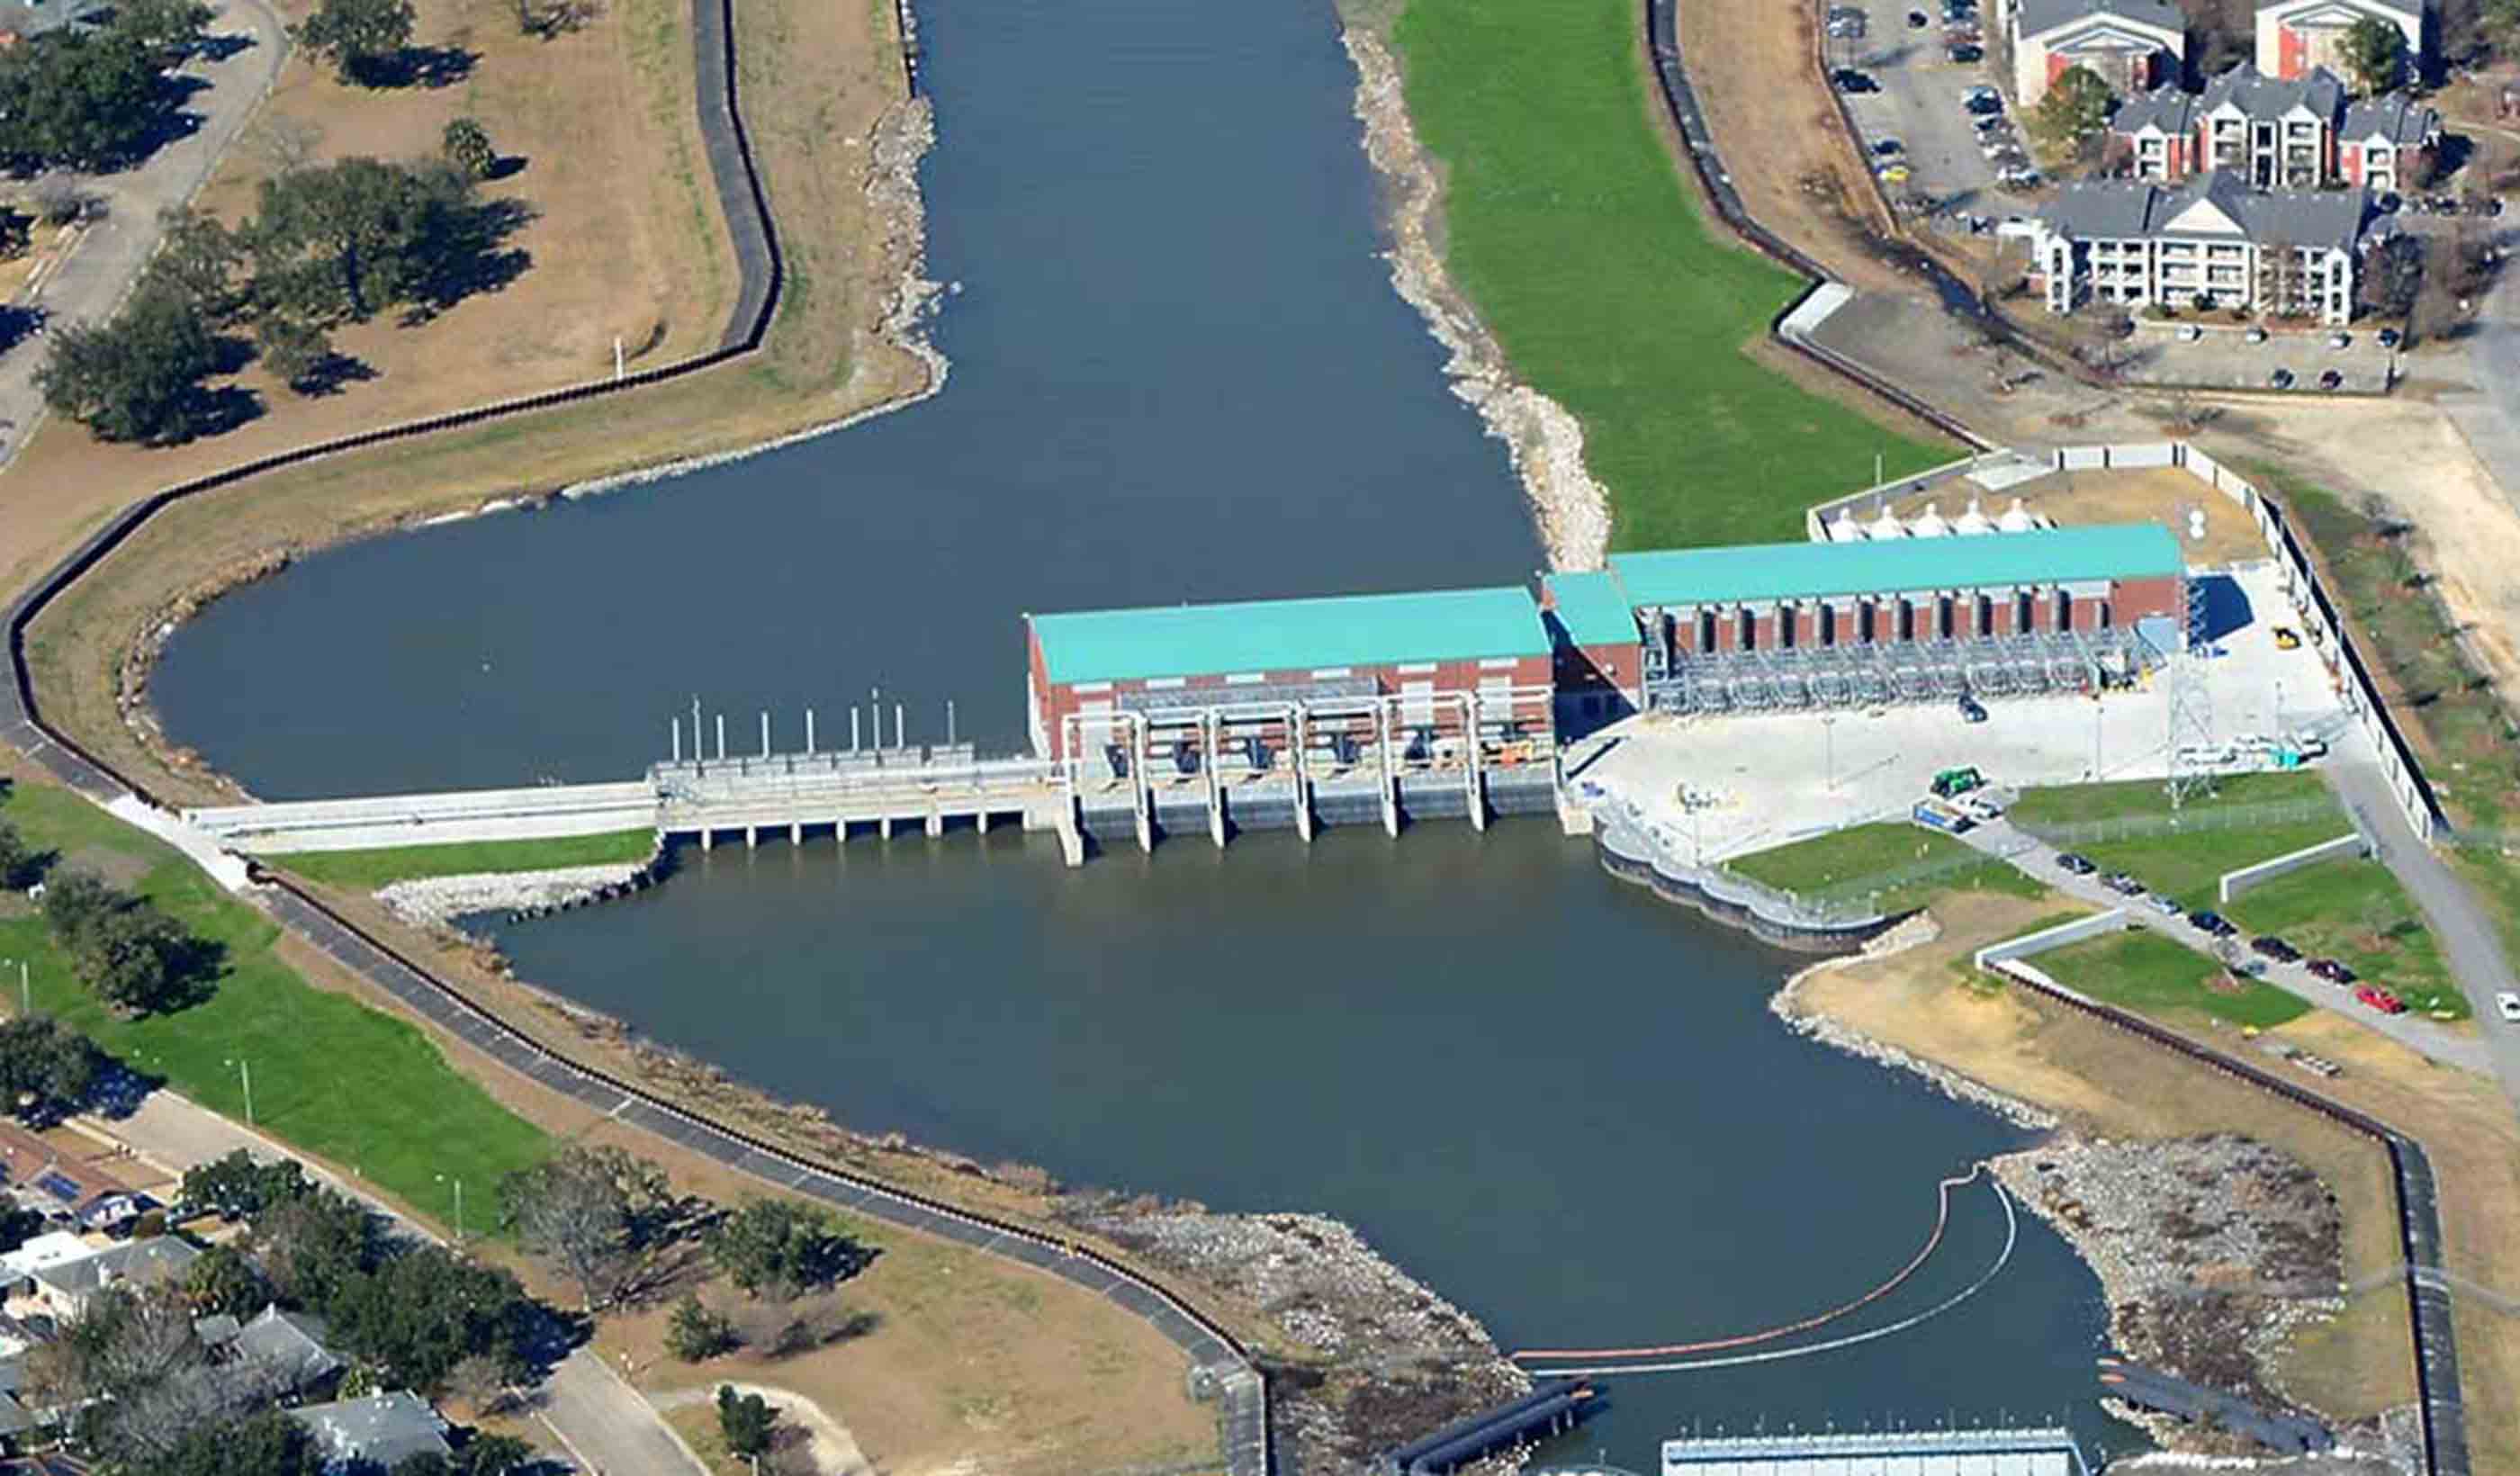 Published in APWA Reporter: Water Resources Design for Long-Term Operations & Maintenance